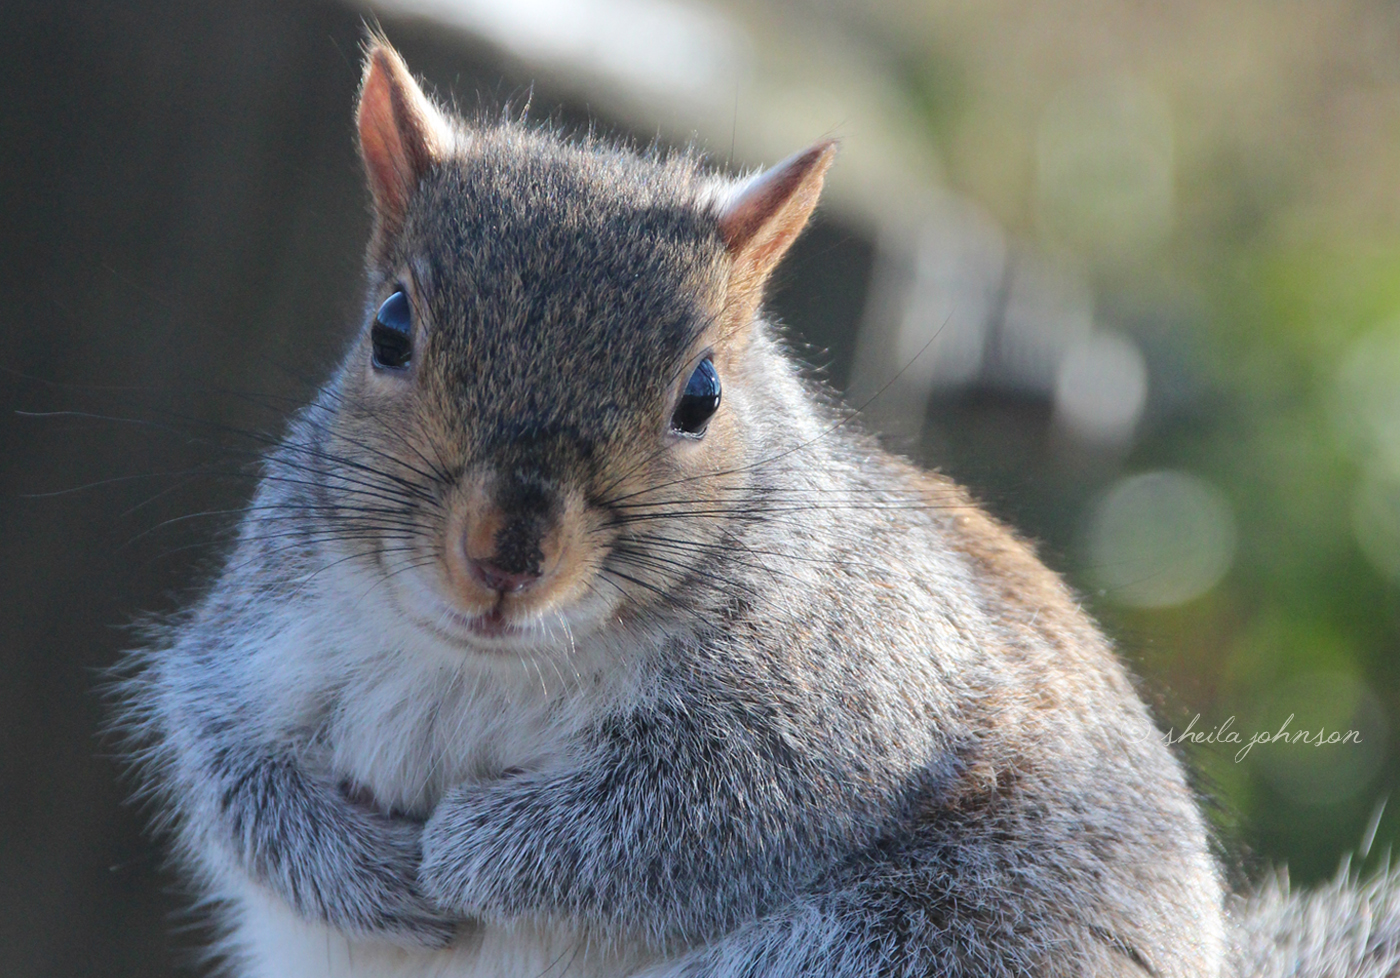 This Gray Squirrel Is So Cute And Hard To Resist. Sadly, I Has No Nuts To Give You, Big Guy. It Looks Like Someone Else May Have Shared Alllll Their Nuts With You Already!